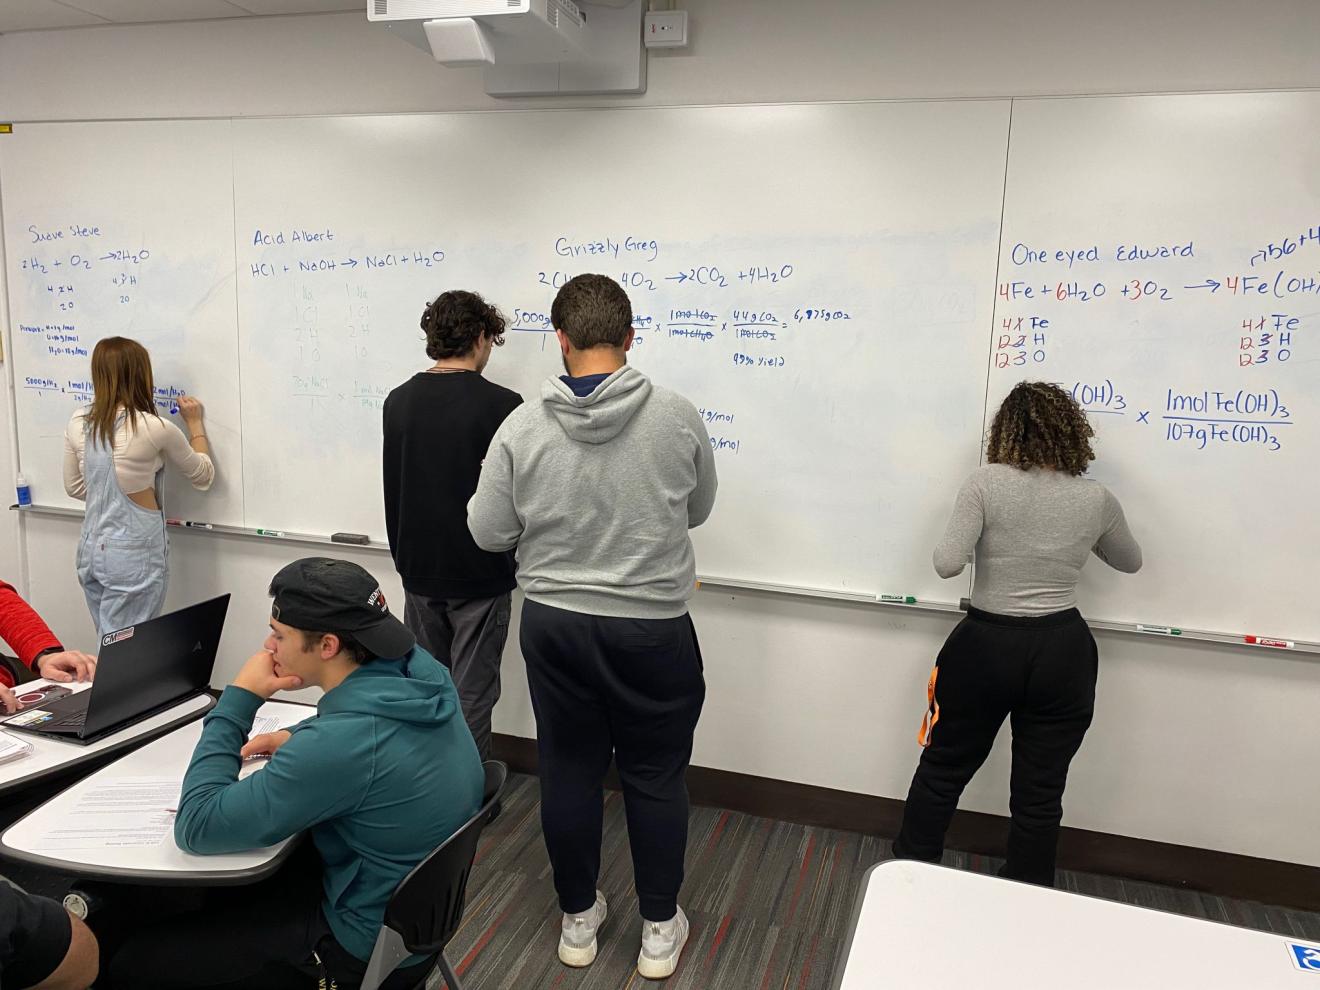 students working on a whiteboard in a classroom